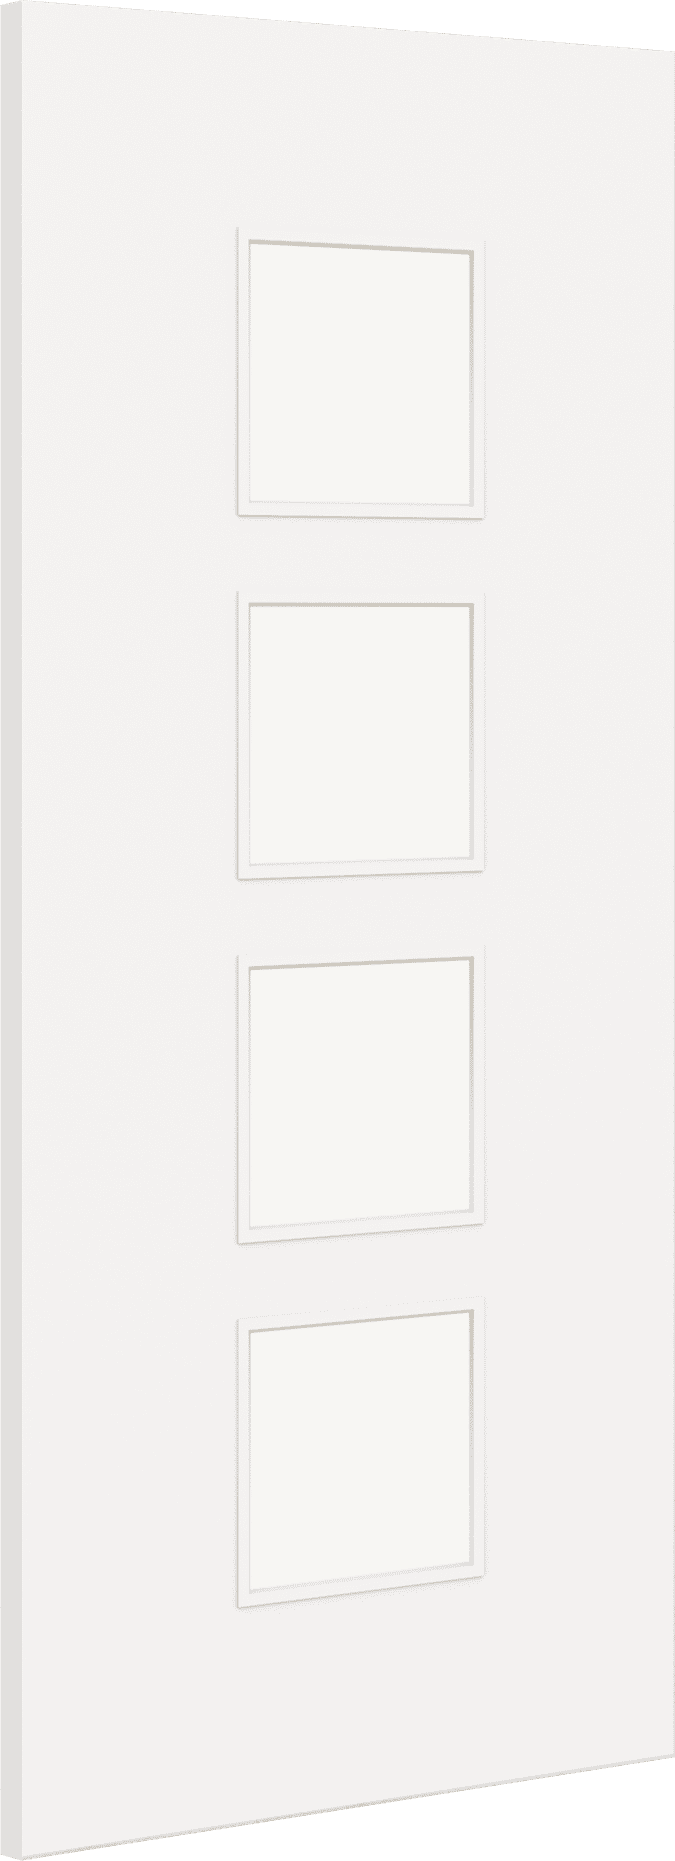 2040mm x 726mm x 44mm Architectural Paint Grade White 09 Frosted Glazed Fire Door Blank